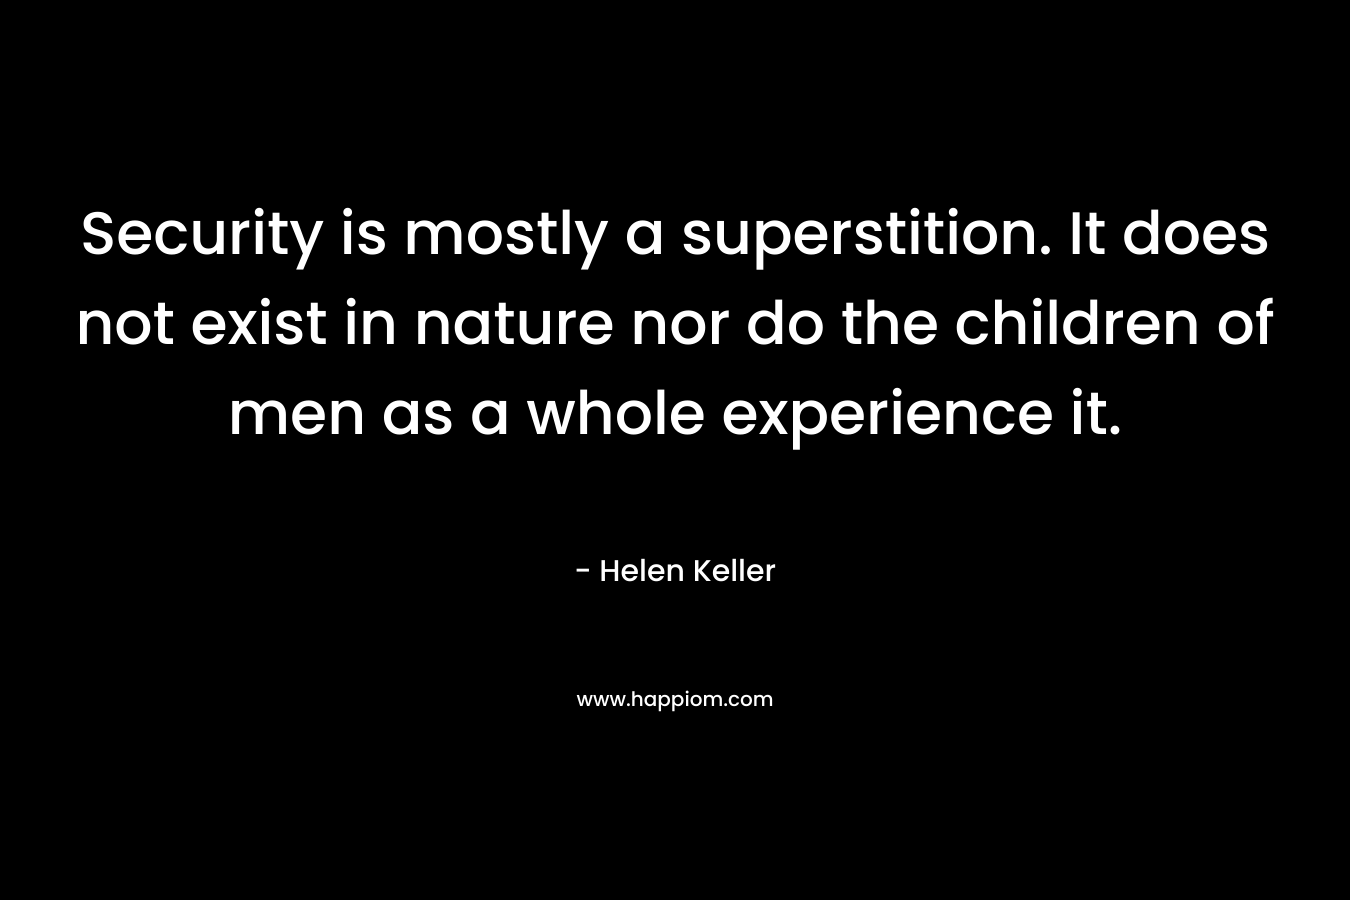 Security is mostly a superstition. It does not exist in nature nor do the children of men as a whole experience it. – Helen Keller